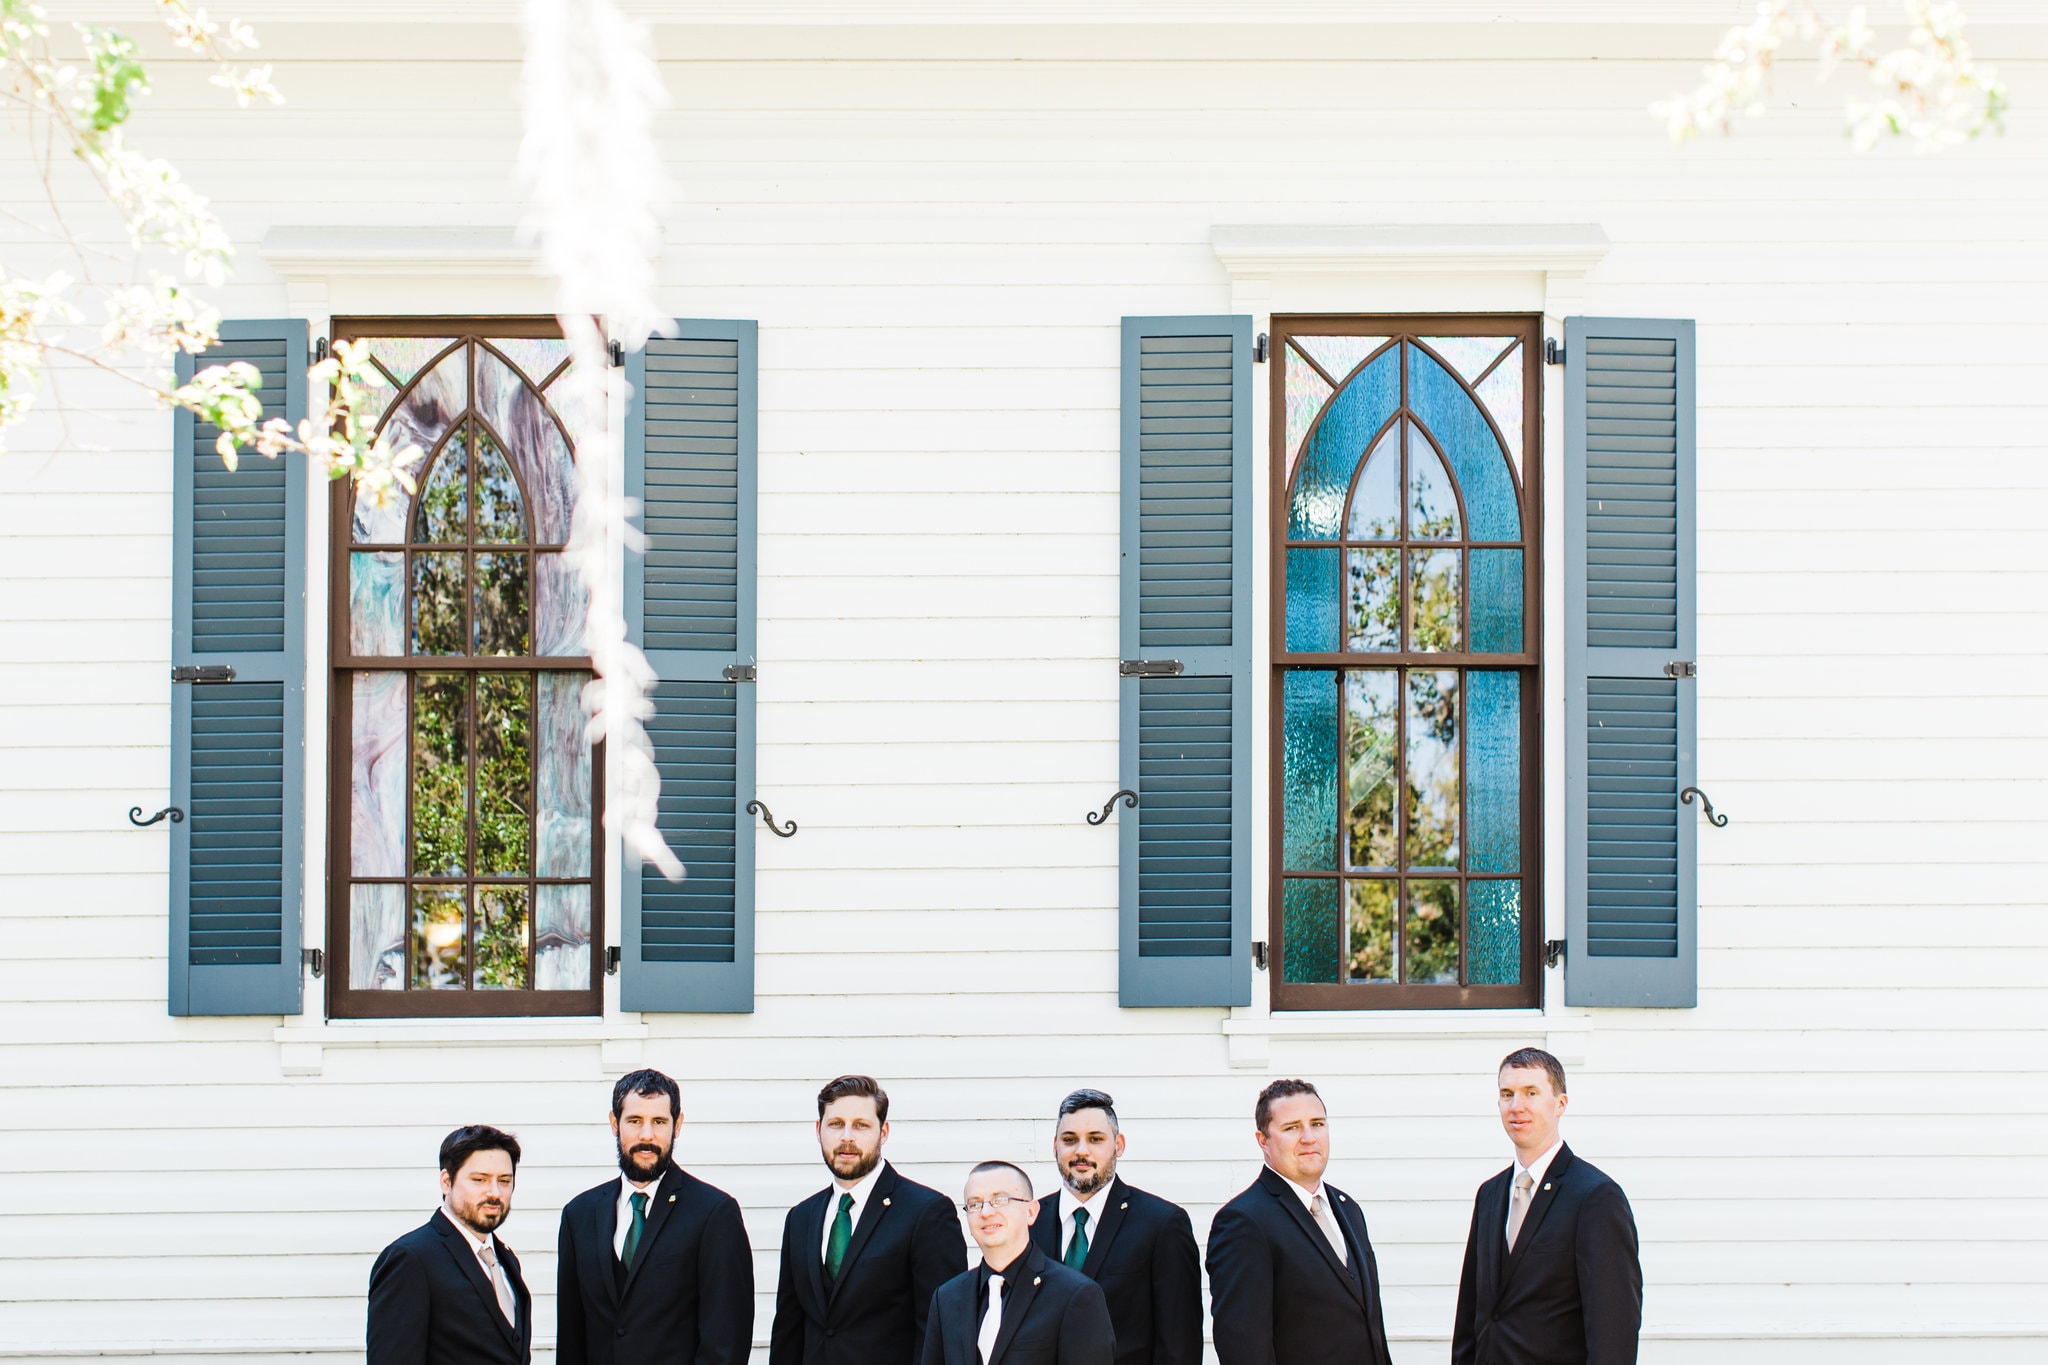 estate on the Halifax groomsmen photos in front of white chapel walls